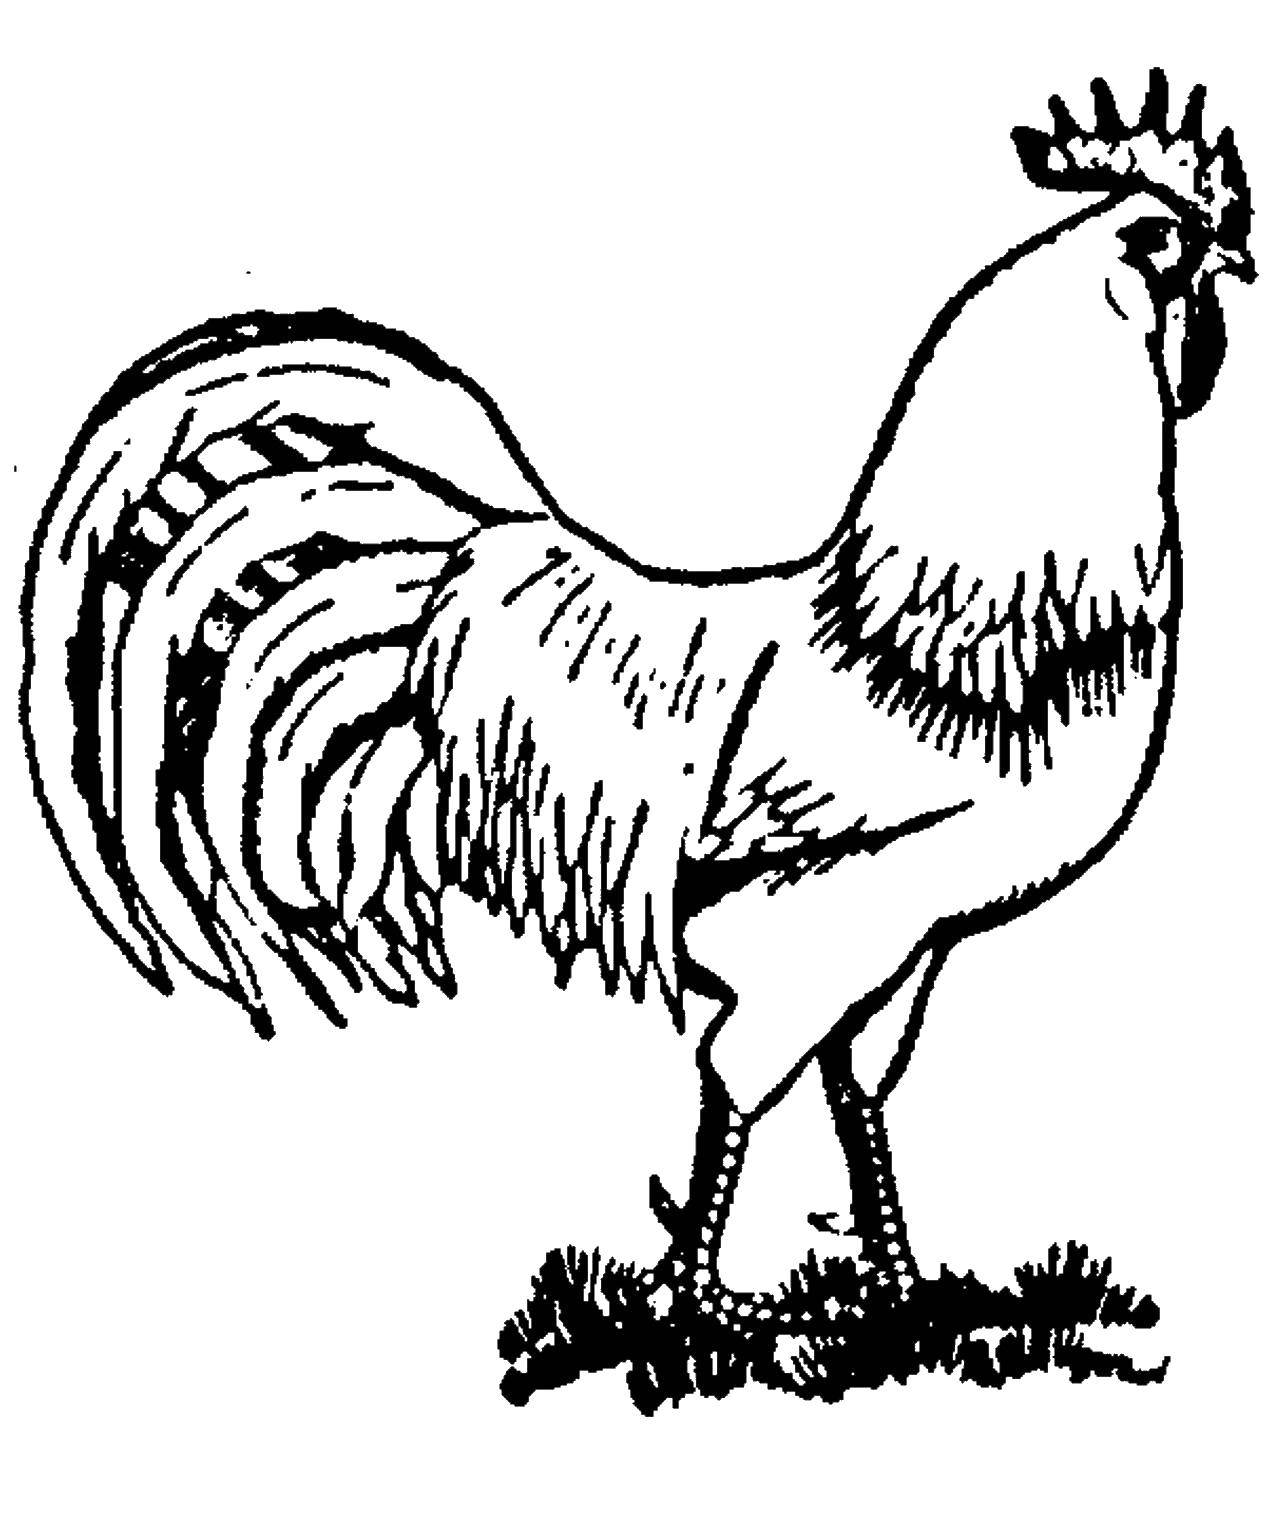 Coloring Proud rooster. Category birds. Tags:  proud rooster.